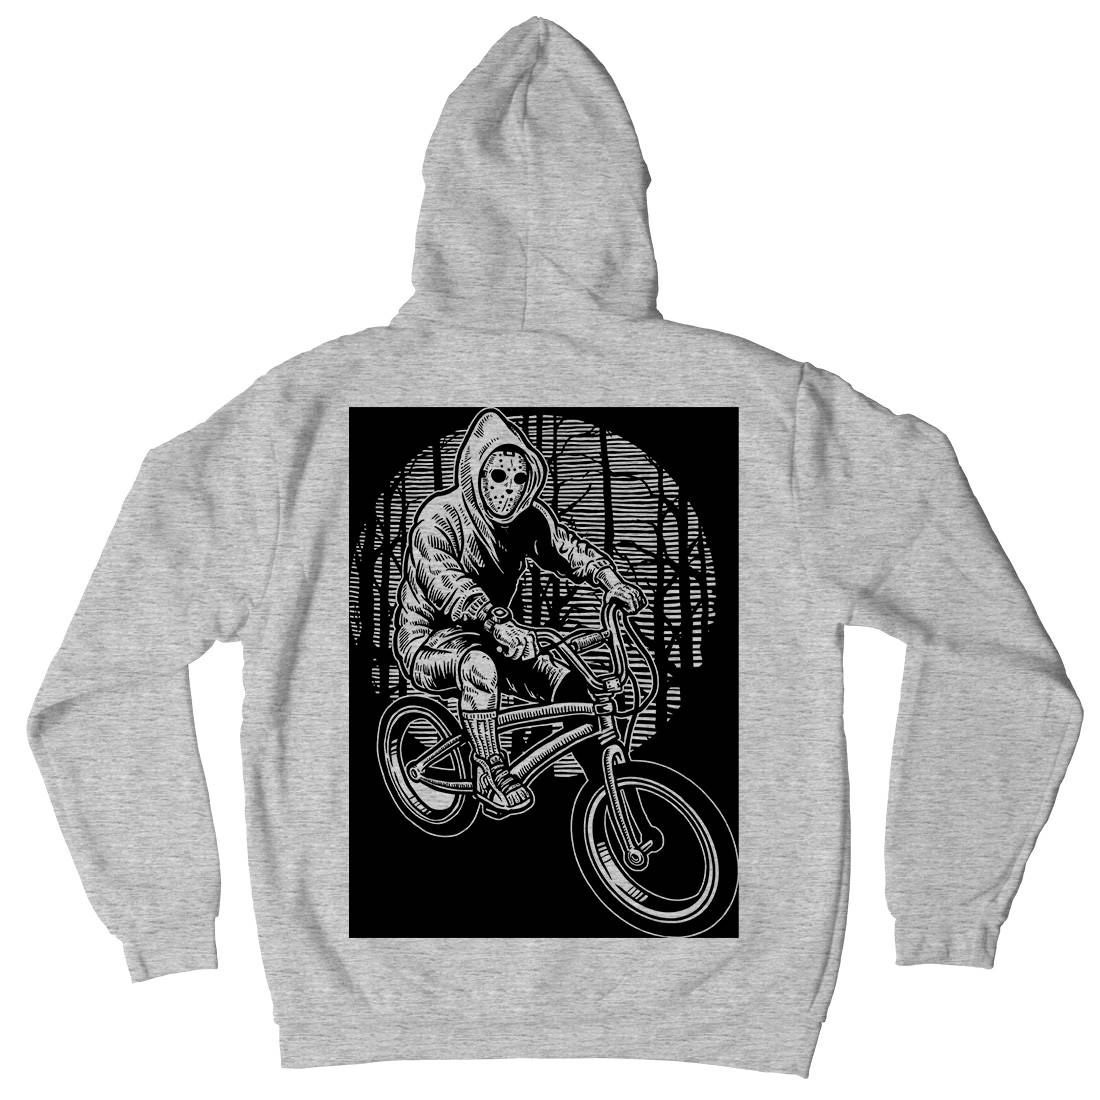 Ride Bike Mens Hoodie With Pocket Horror A563